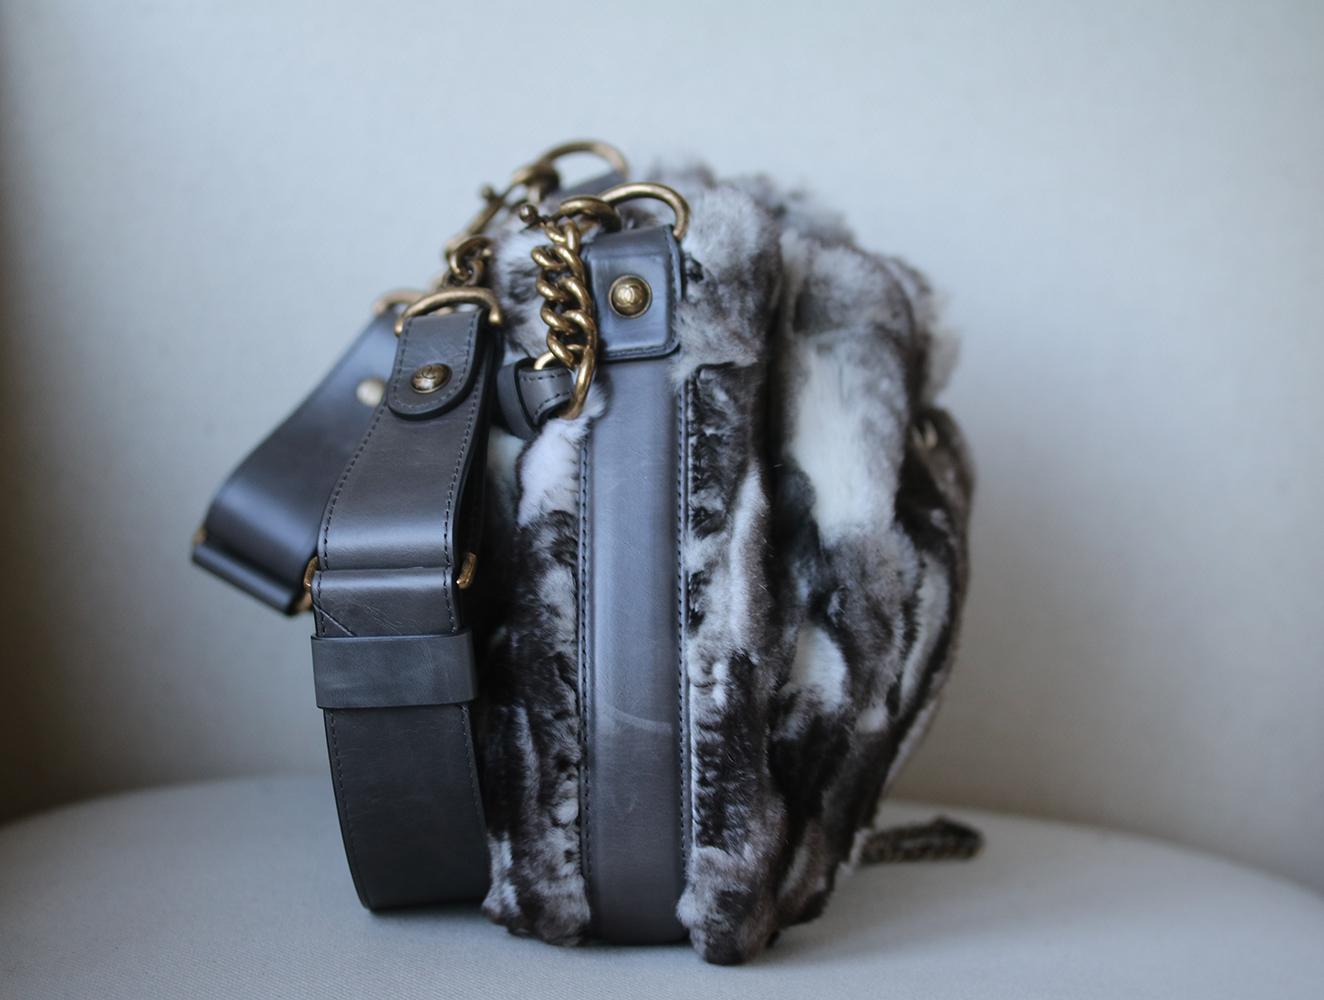 This super-chic shoulder and cross body bag is crafted in plush fur and leather accents. The bag features a bronze chain drawstring feature threaded through the opening of the bag. Chanel CC clasp push lock tightens the chain fastening. Grey leather